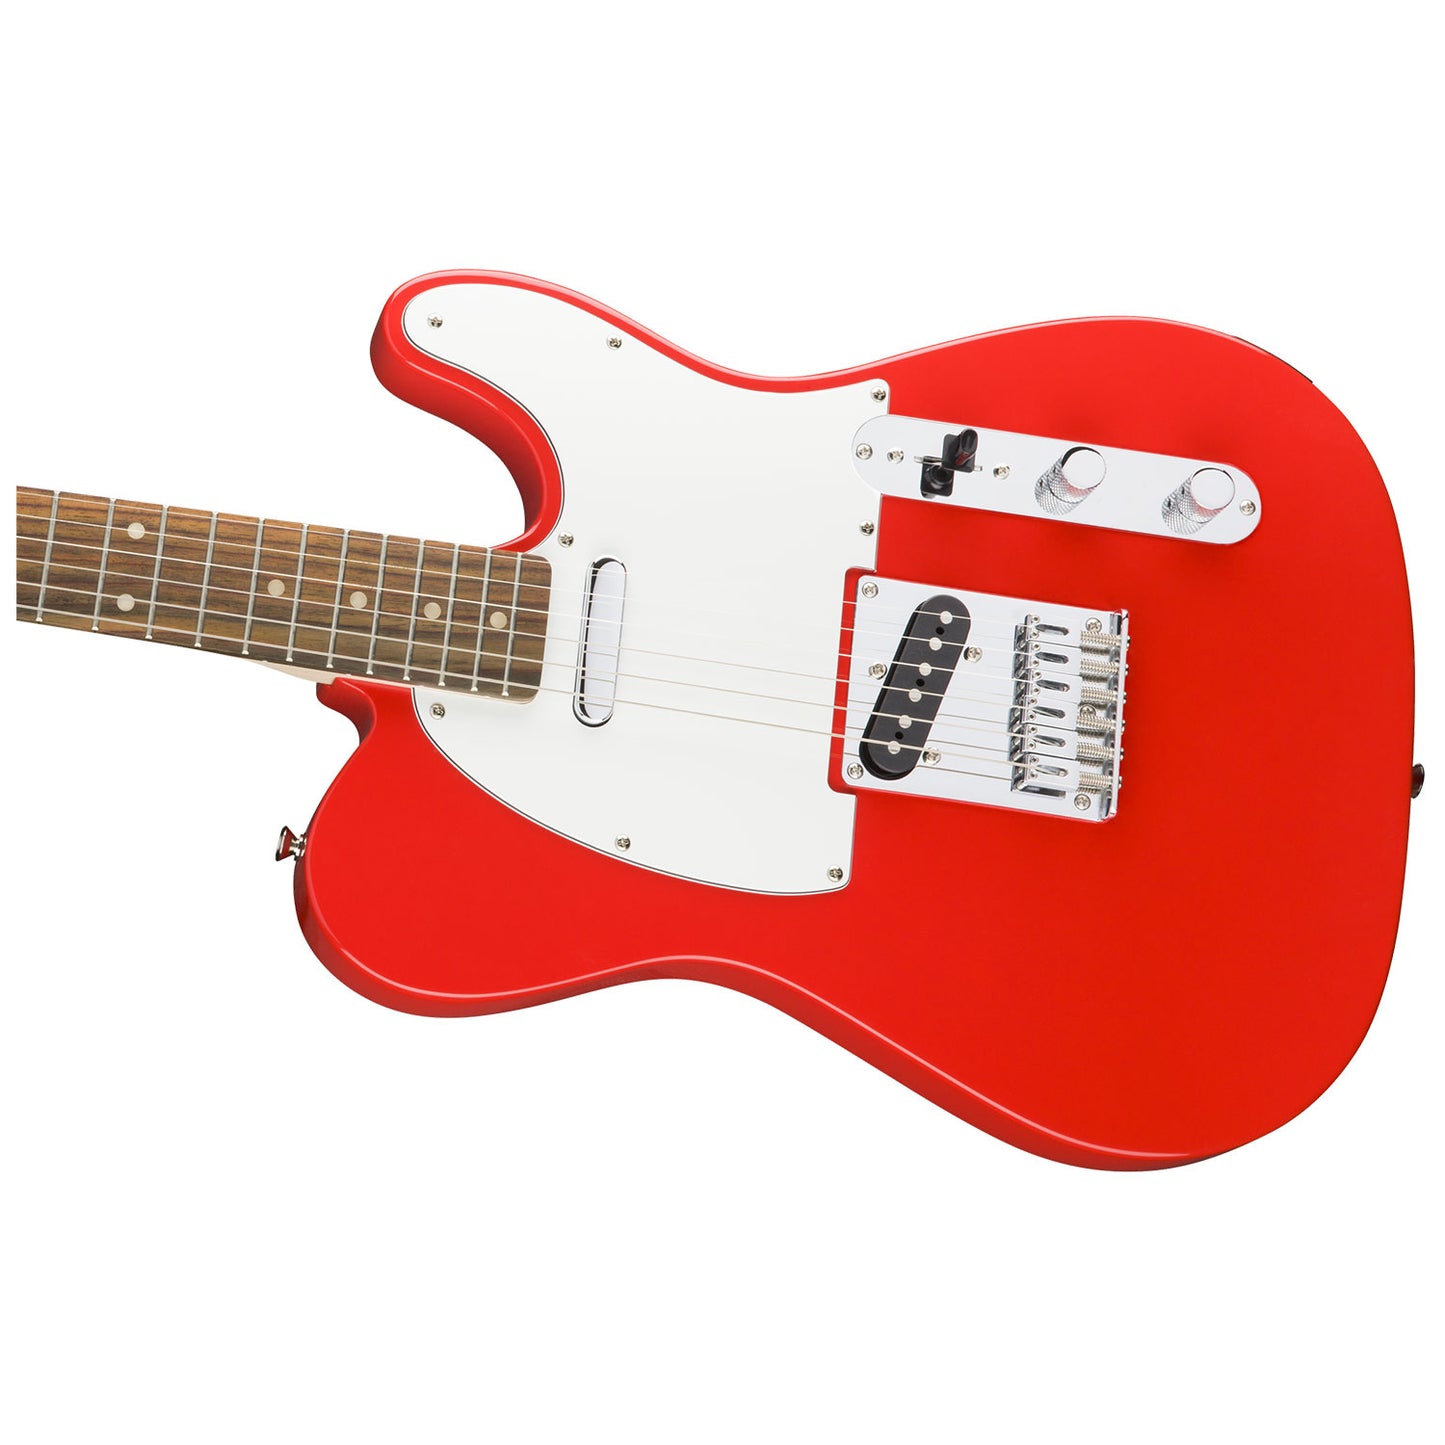 Squier Affinity Telecaster - Race Red